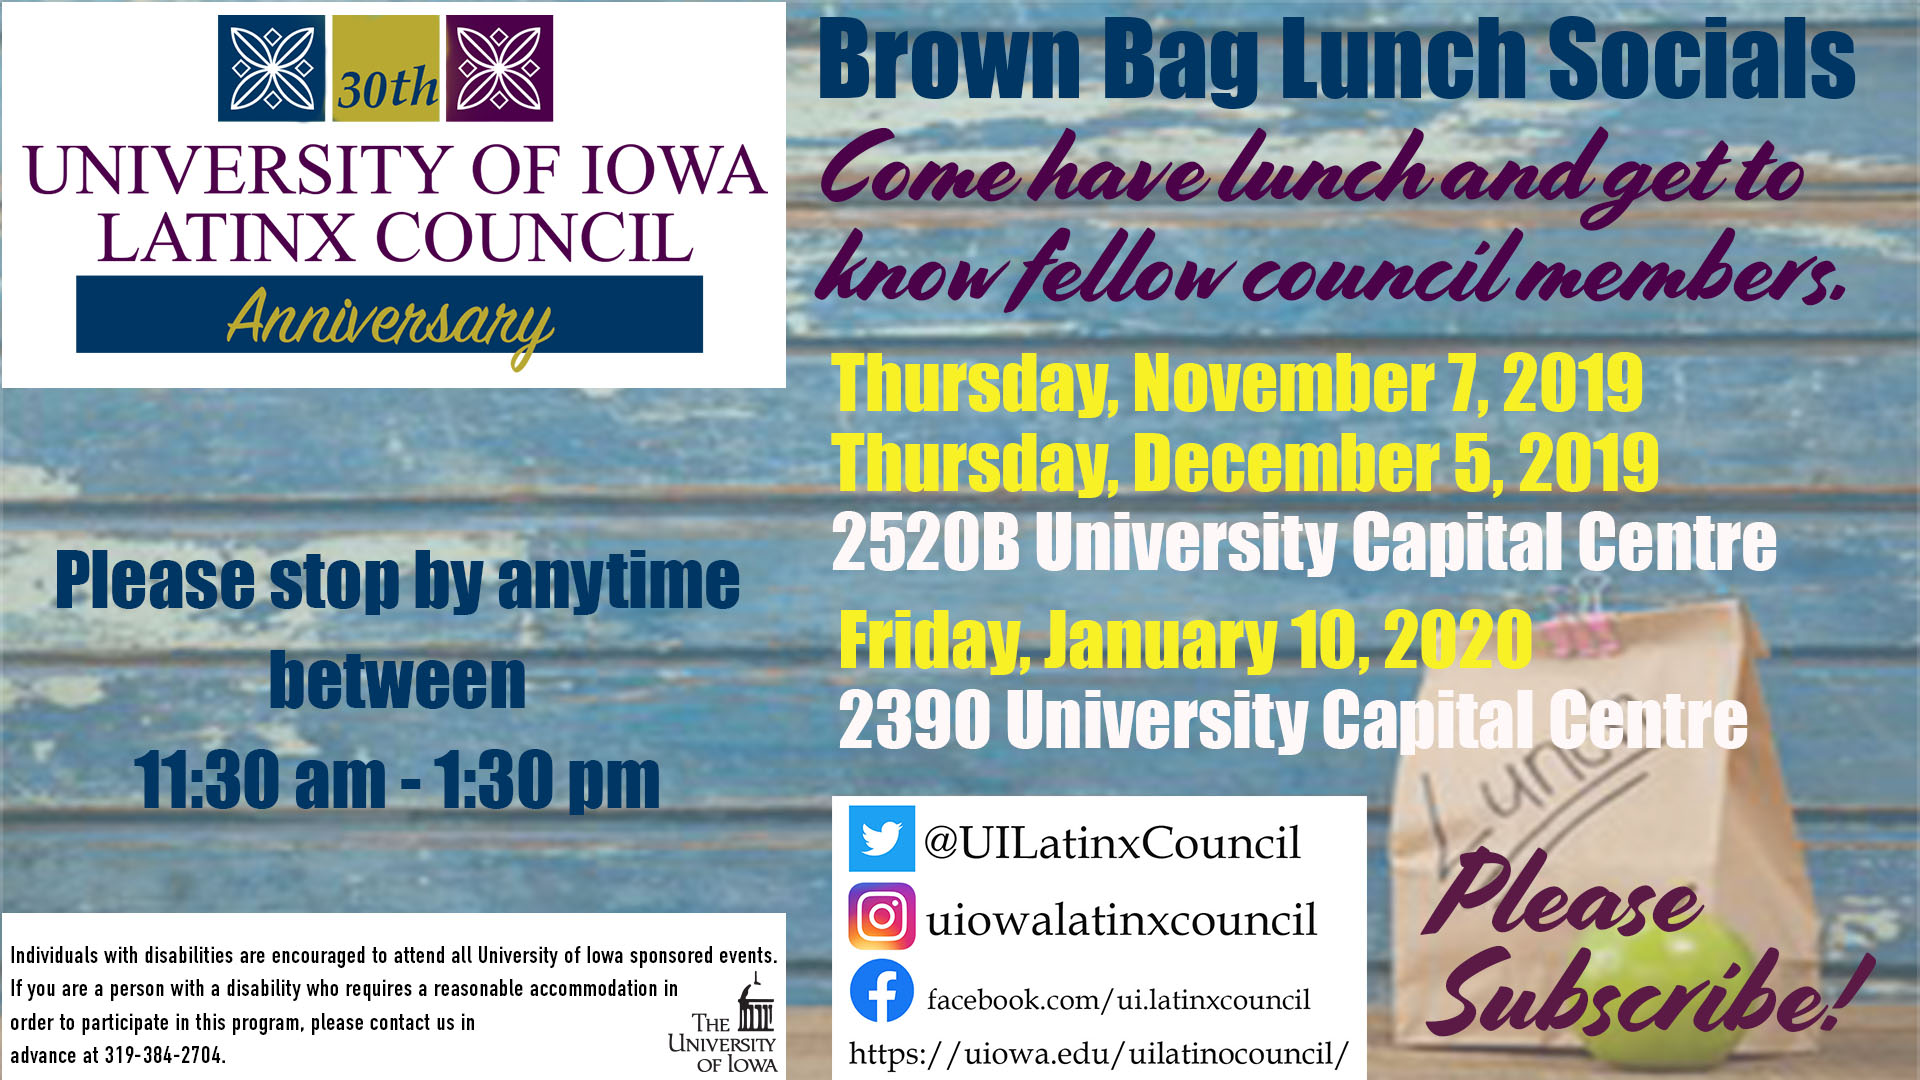 University of Iowa Latinx Council Anniversary Brown Bag Lunch Socials. Come have lunch and get to know fellow council members. Please stop by anytime between 11:30 am - 1:30 pm.